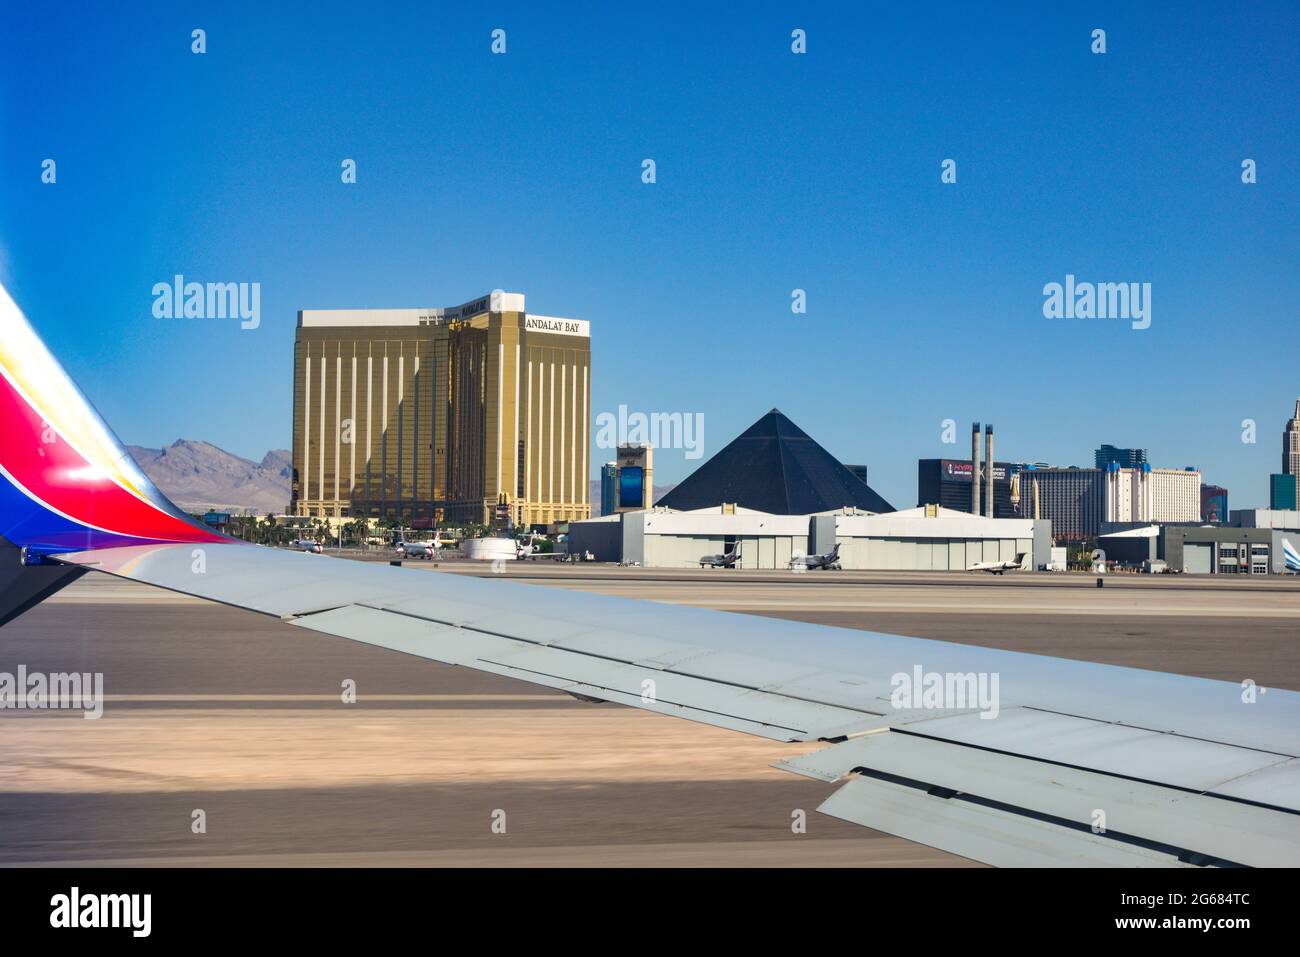 View from a window  seat in the 780 Max airplane of wing and the backside of casinos on the Strip at Las Vegas MaCarran International airport, LV, NV Stock Photo